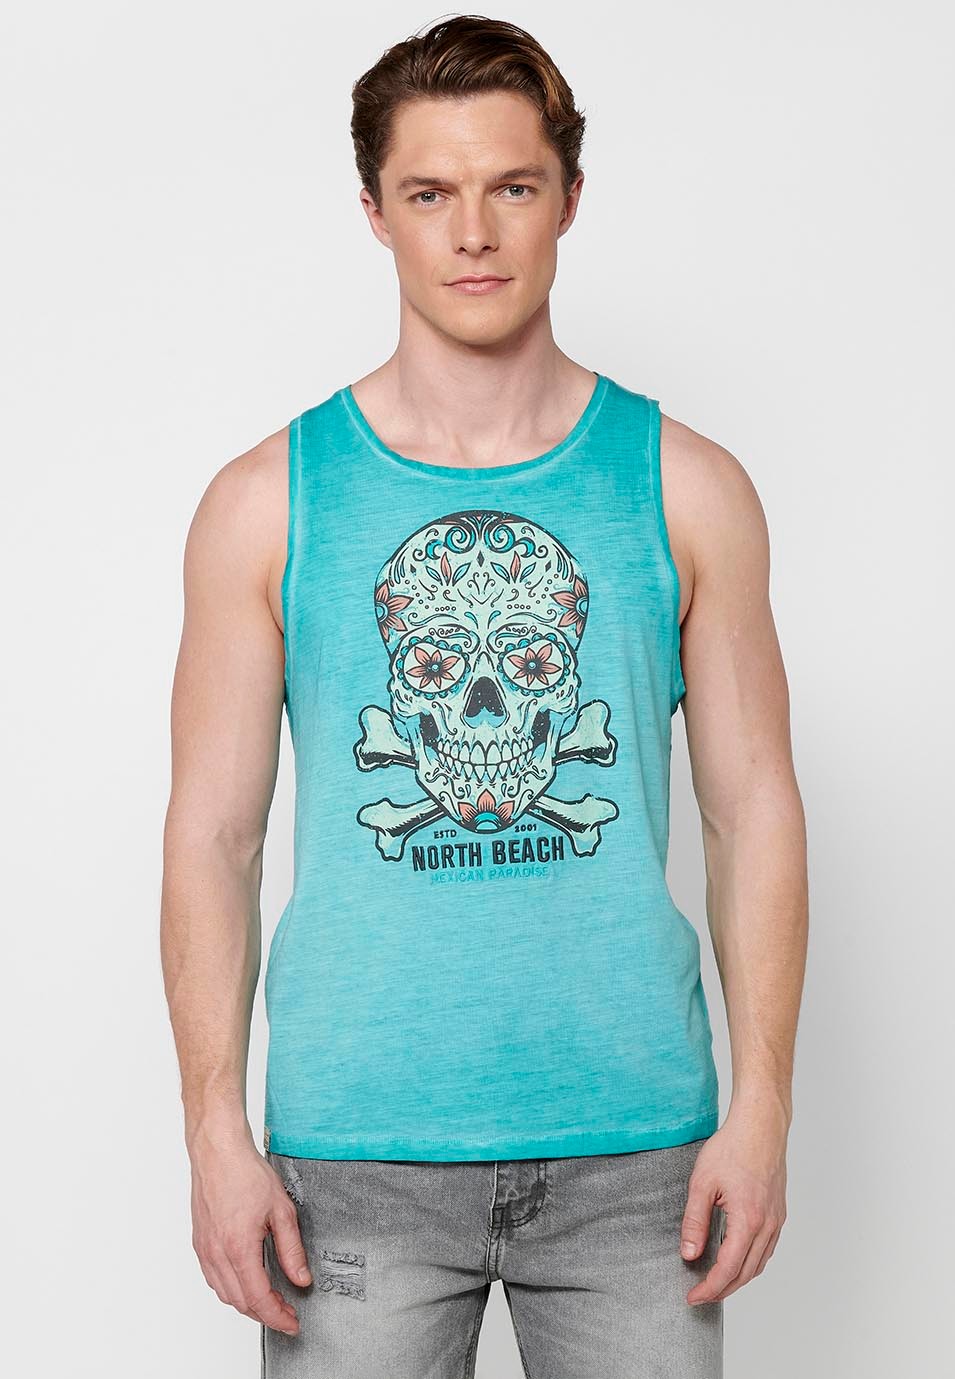 Cotton tank top, with front print, green color for men